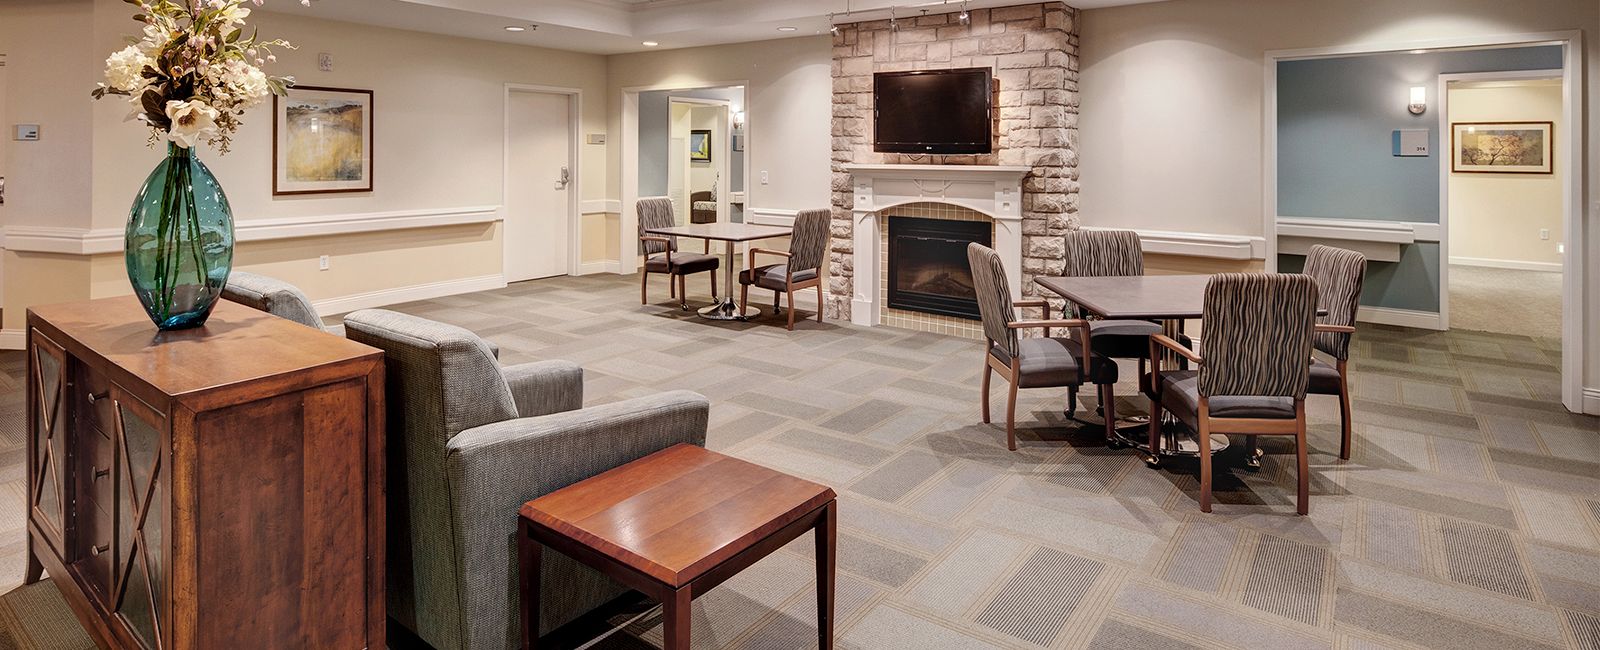 Senior living community interior at Lakeview Village featuring modern architecture and decor.